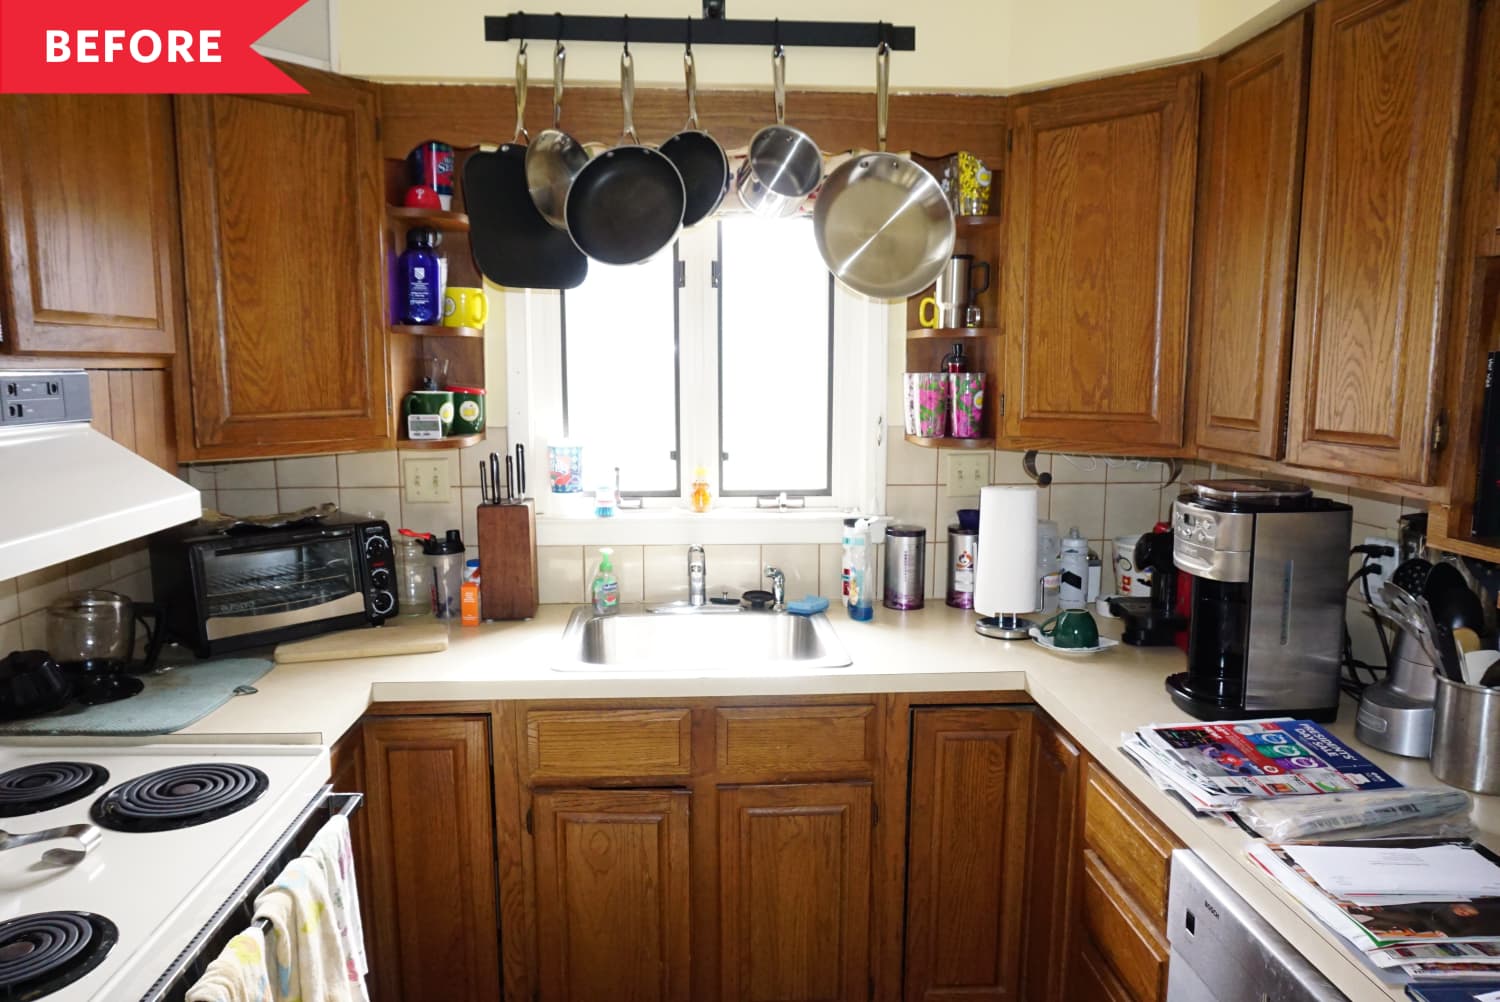 Before and After: A Home Stager Brought This Tiny Kitchen “Trapped in the ‘80s” to the Present